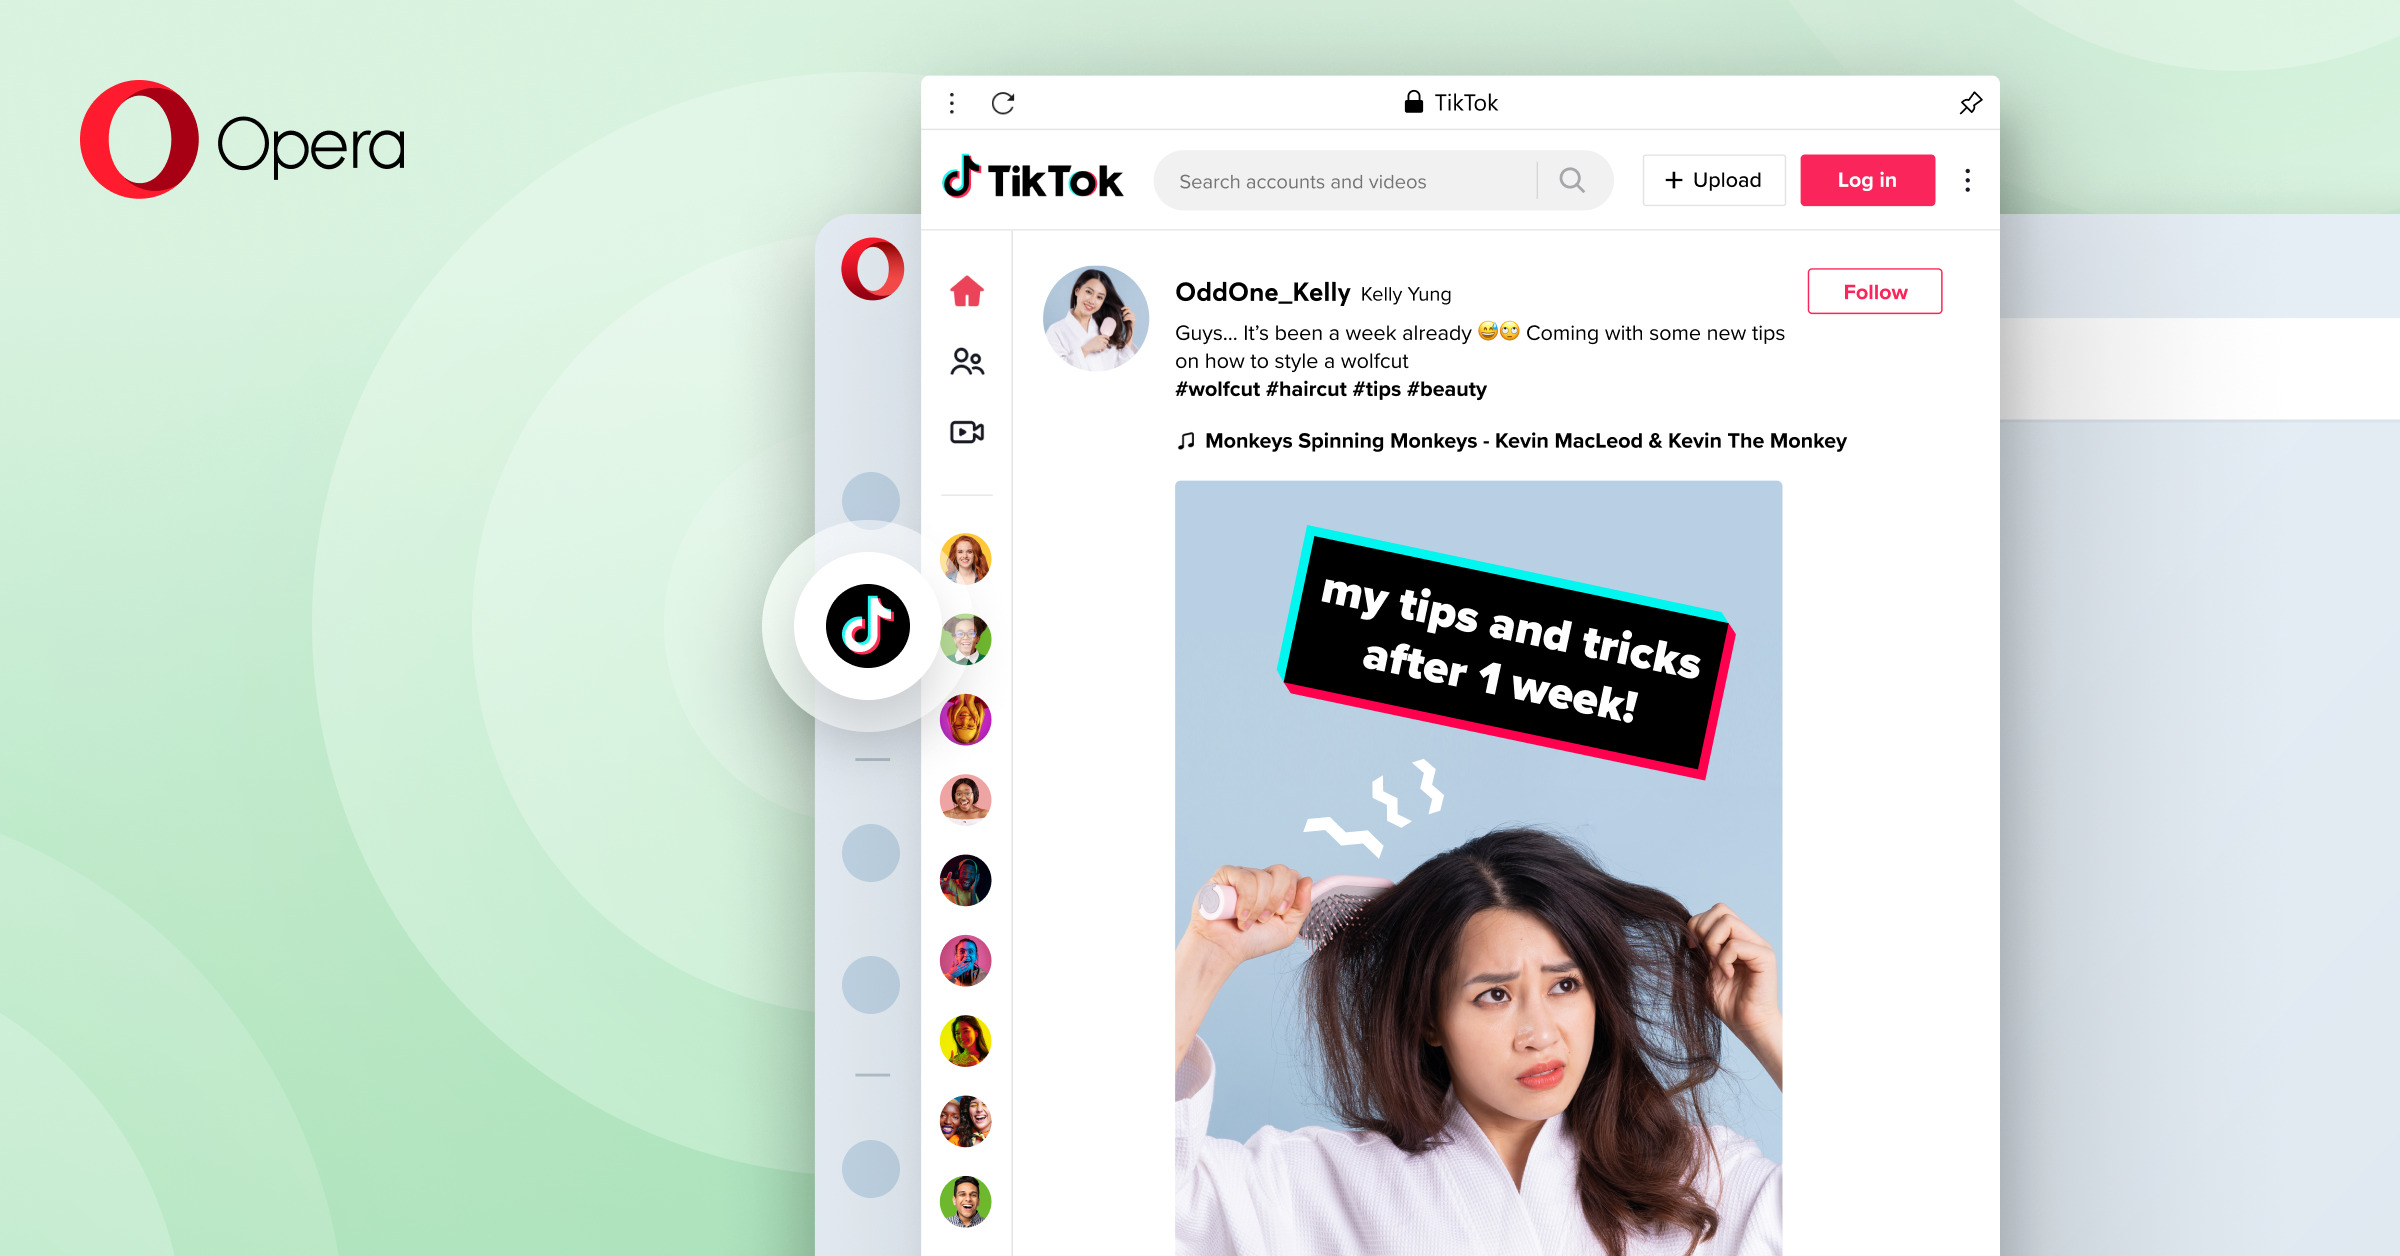 TikTok is now available in the sidebar of Opera